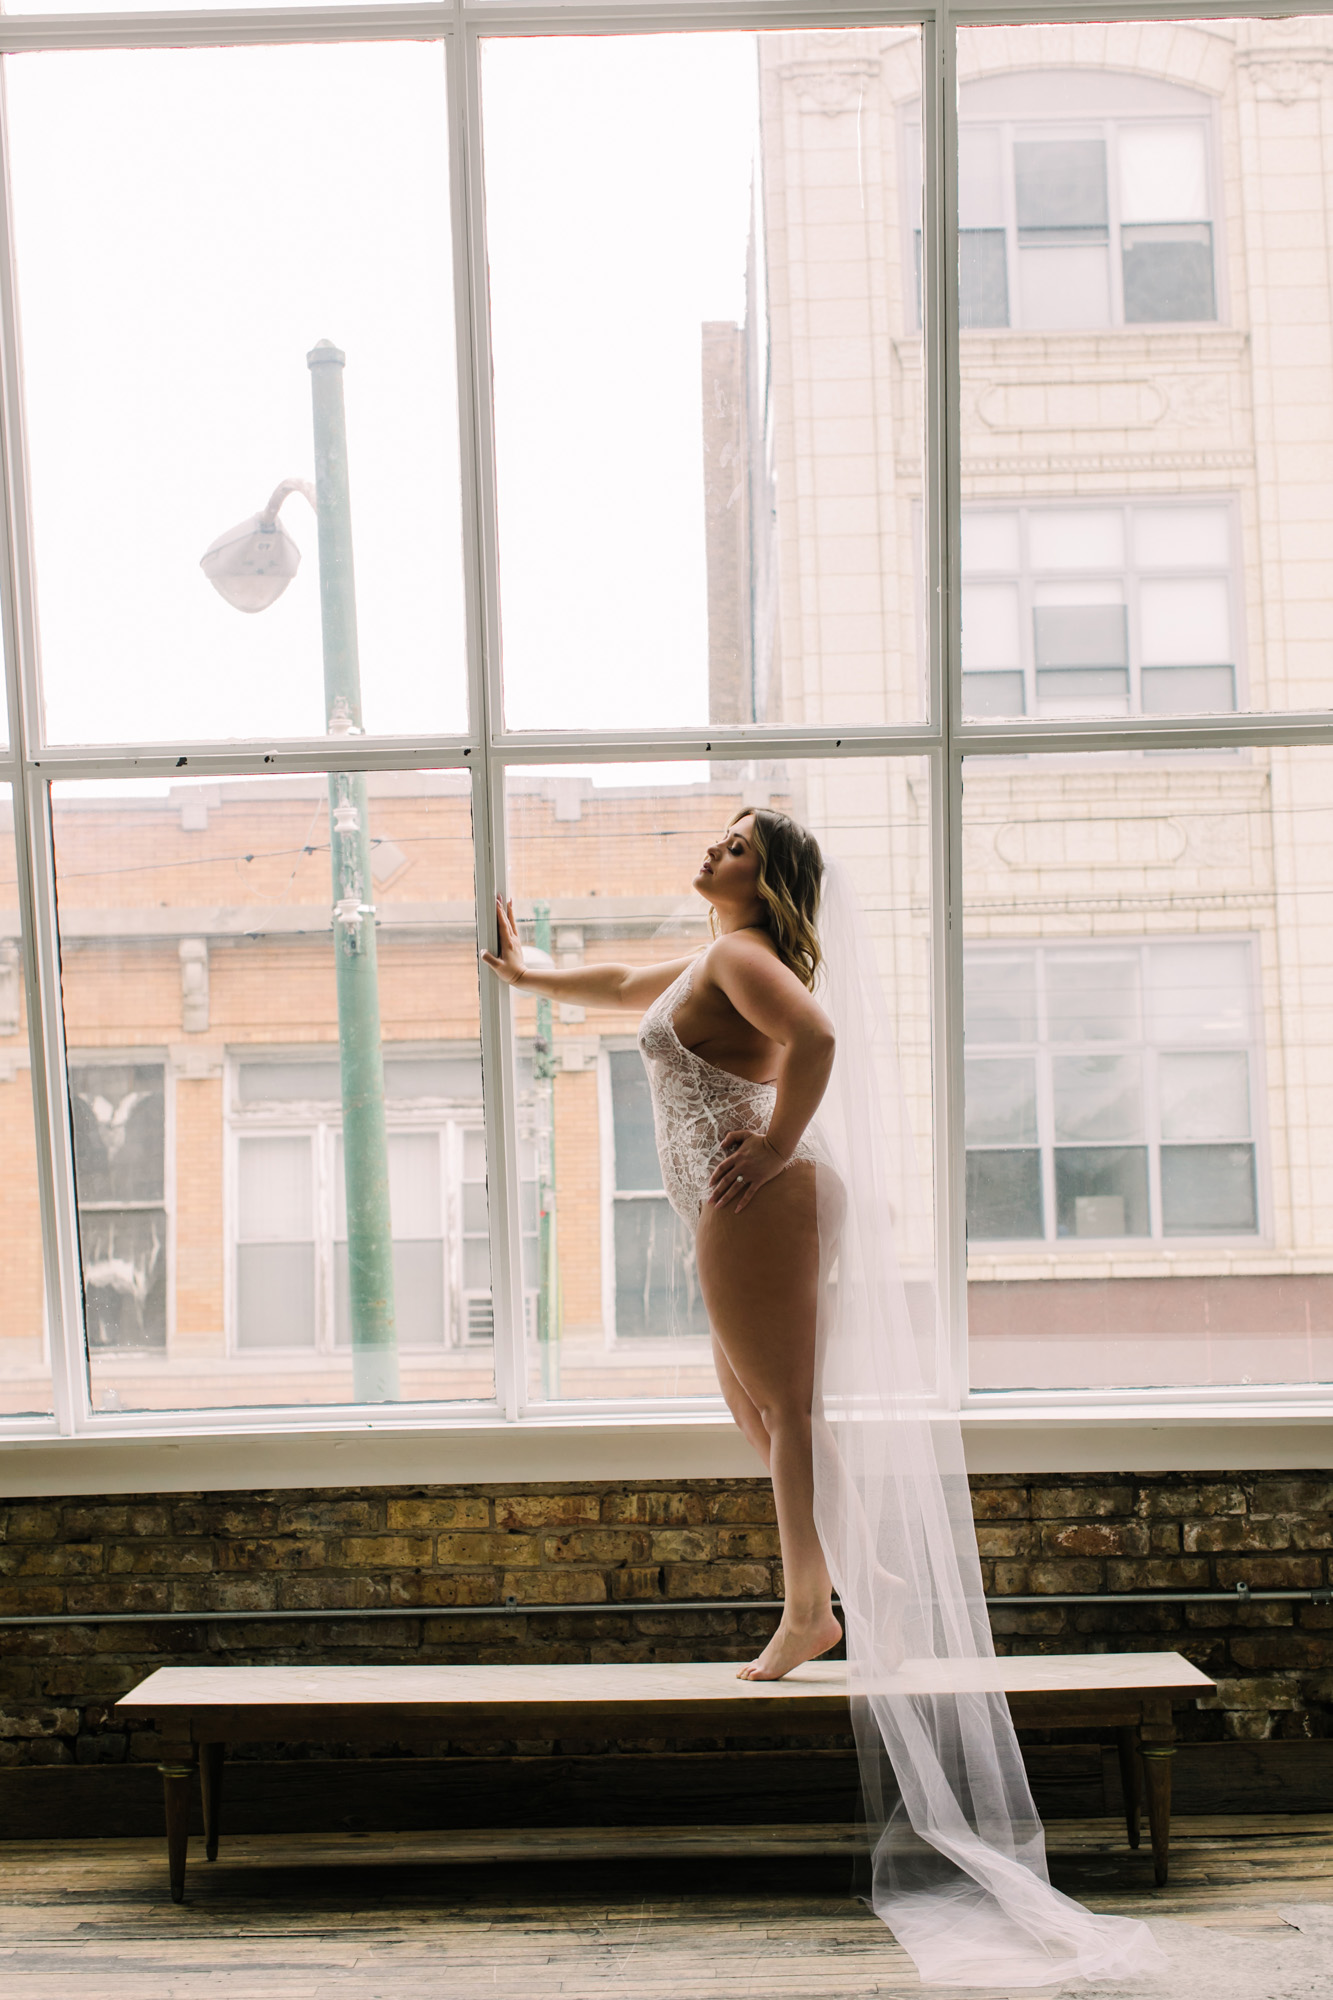 A beautiful bridal boudoir photo taken at Debi Lilly's Parisian styled loft in Chicago.